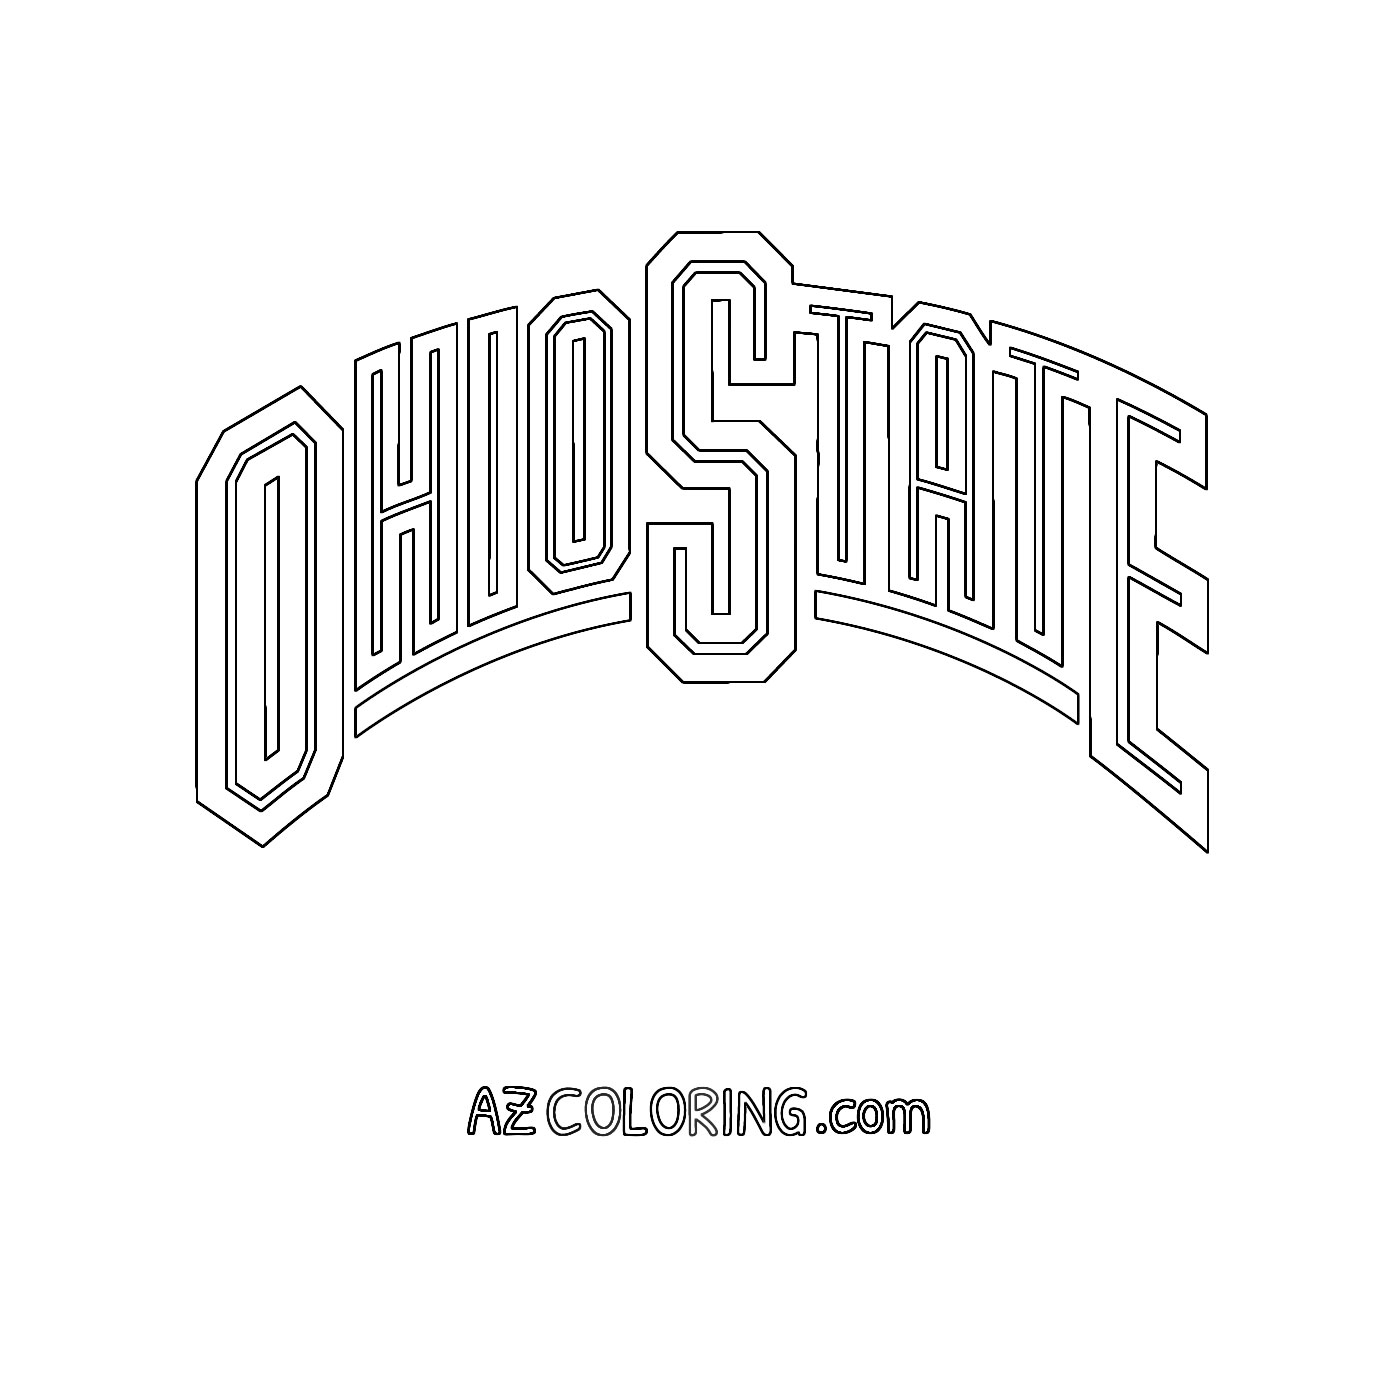 349 Simple Ohio Coloring Page for Kids